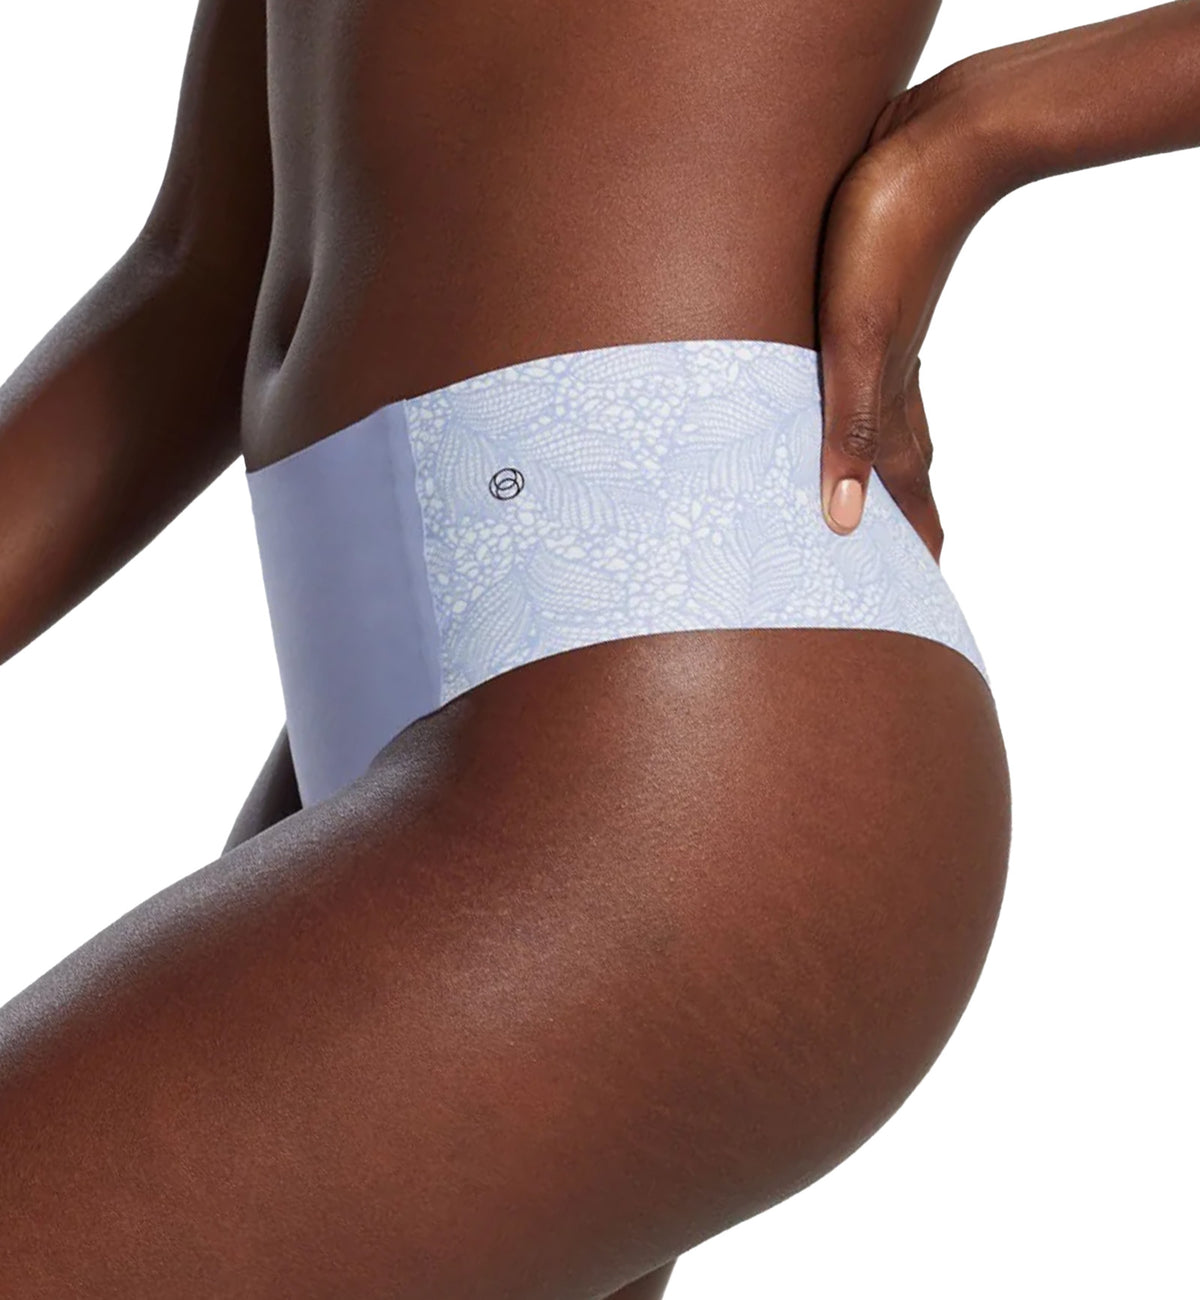 Evelyn &amp; Bobbie High-Waisted Thong (1703),US 0-14,Moonstone Lace - Moonstone Lace,US 0-14